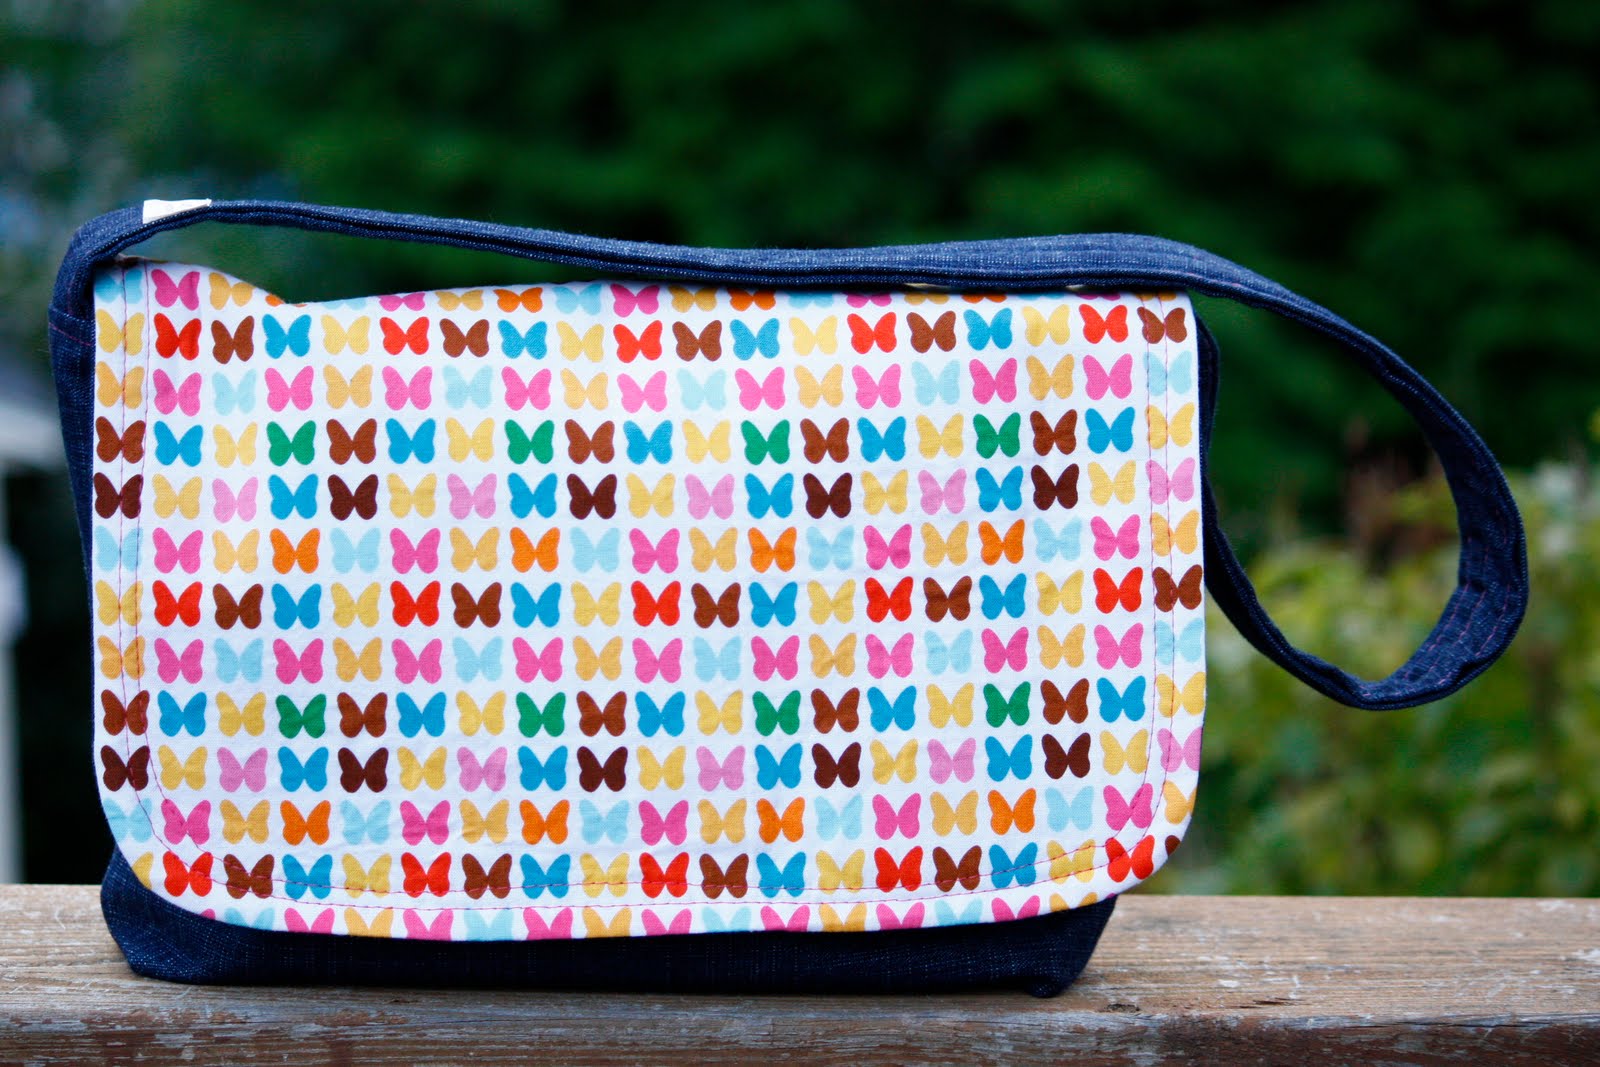 Build Your Own Small Messenger Bag #151A